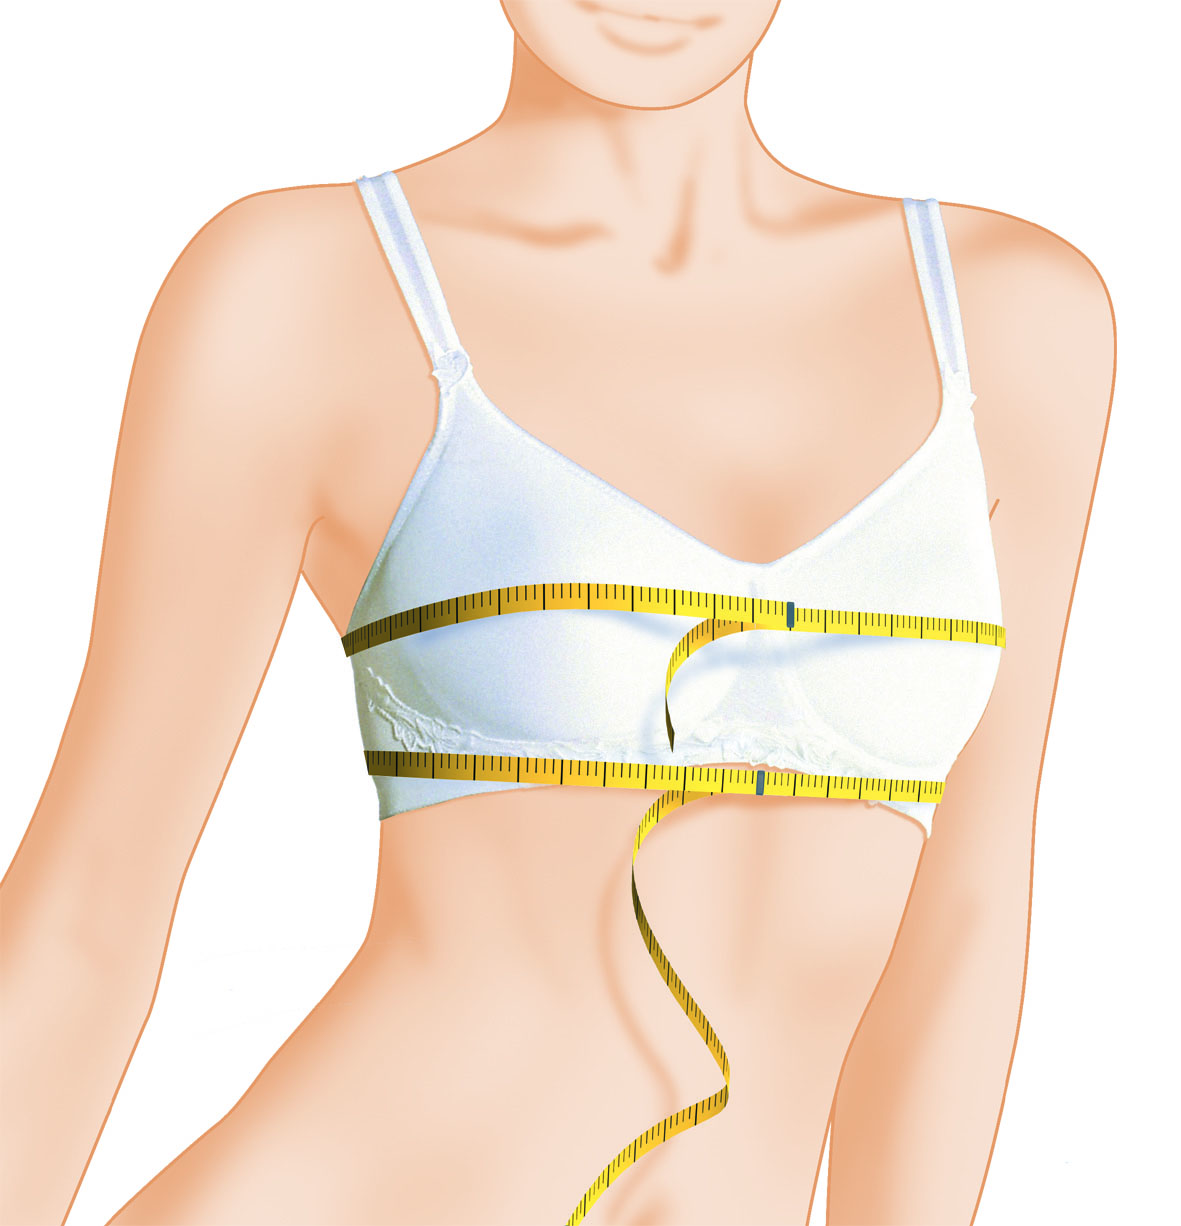 How To Correctly Measure For Your Bra Dianne S Mastectomy